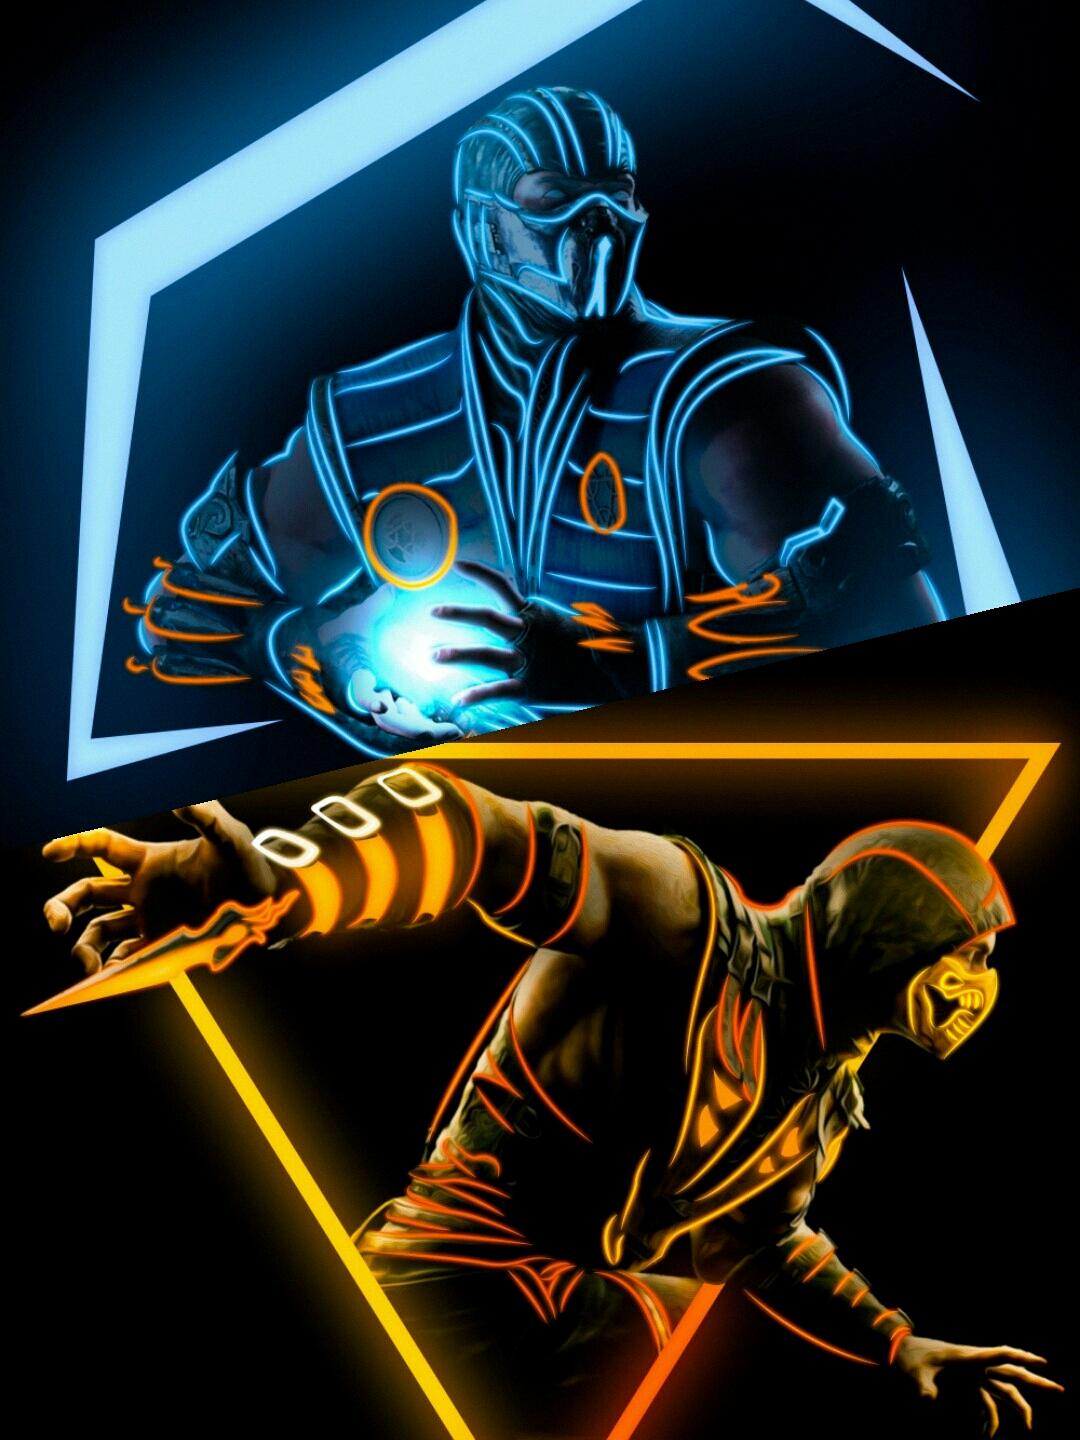 Rivals or Brothers? A Study of Sub-Zero and Scorpion's Relationship